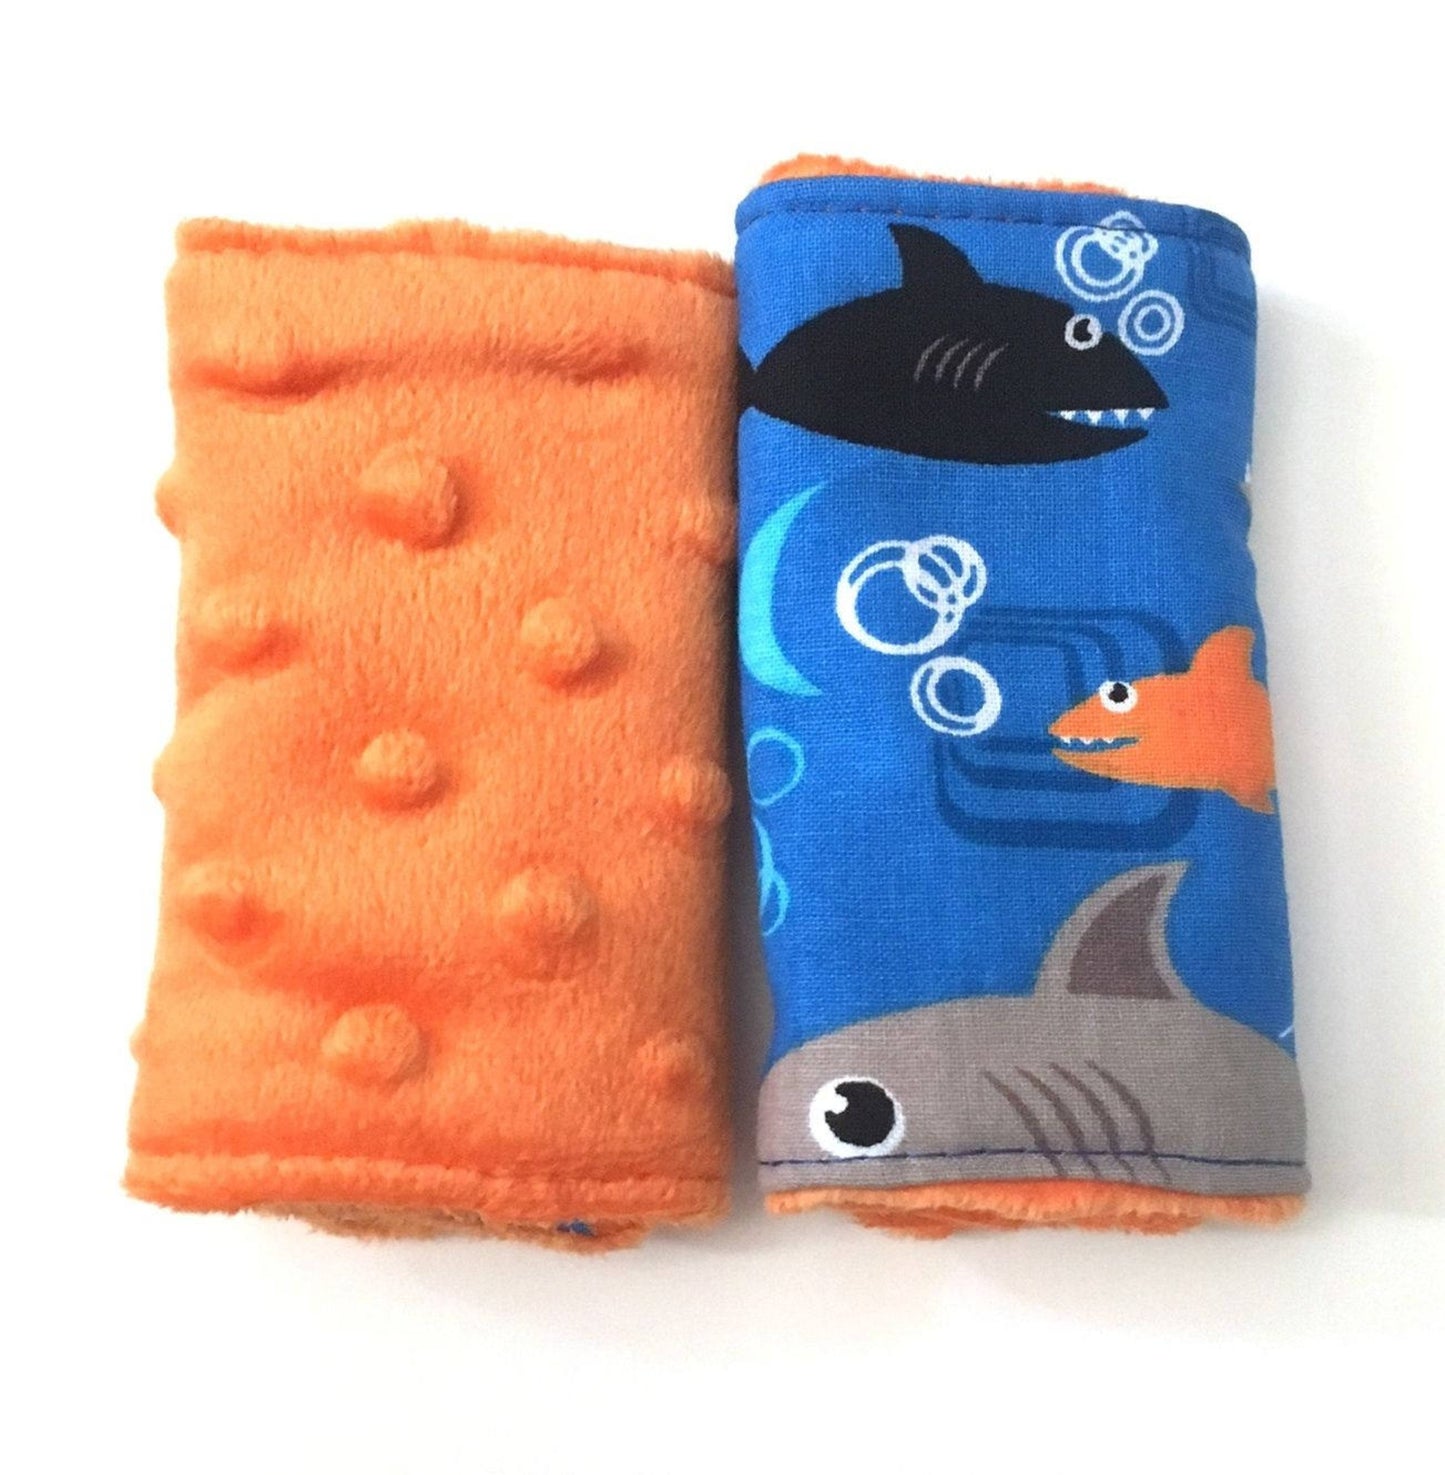 shark car seat strap covers shown with orange minky and 4" size